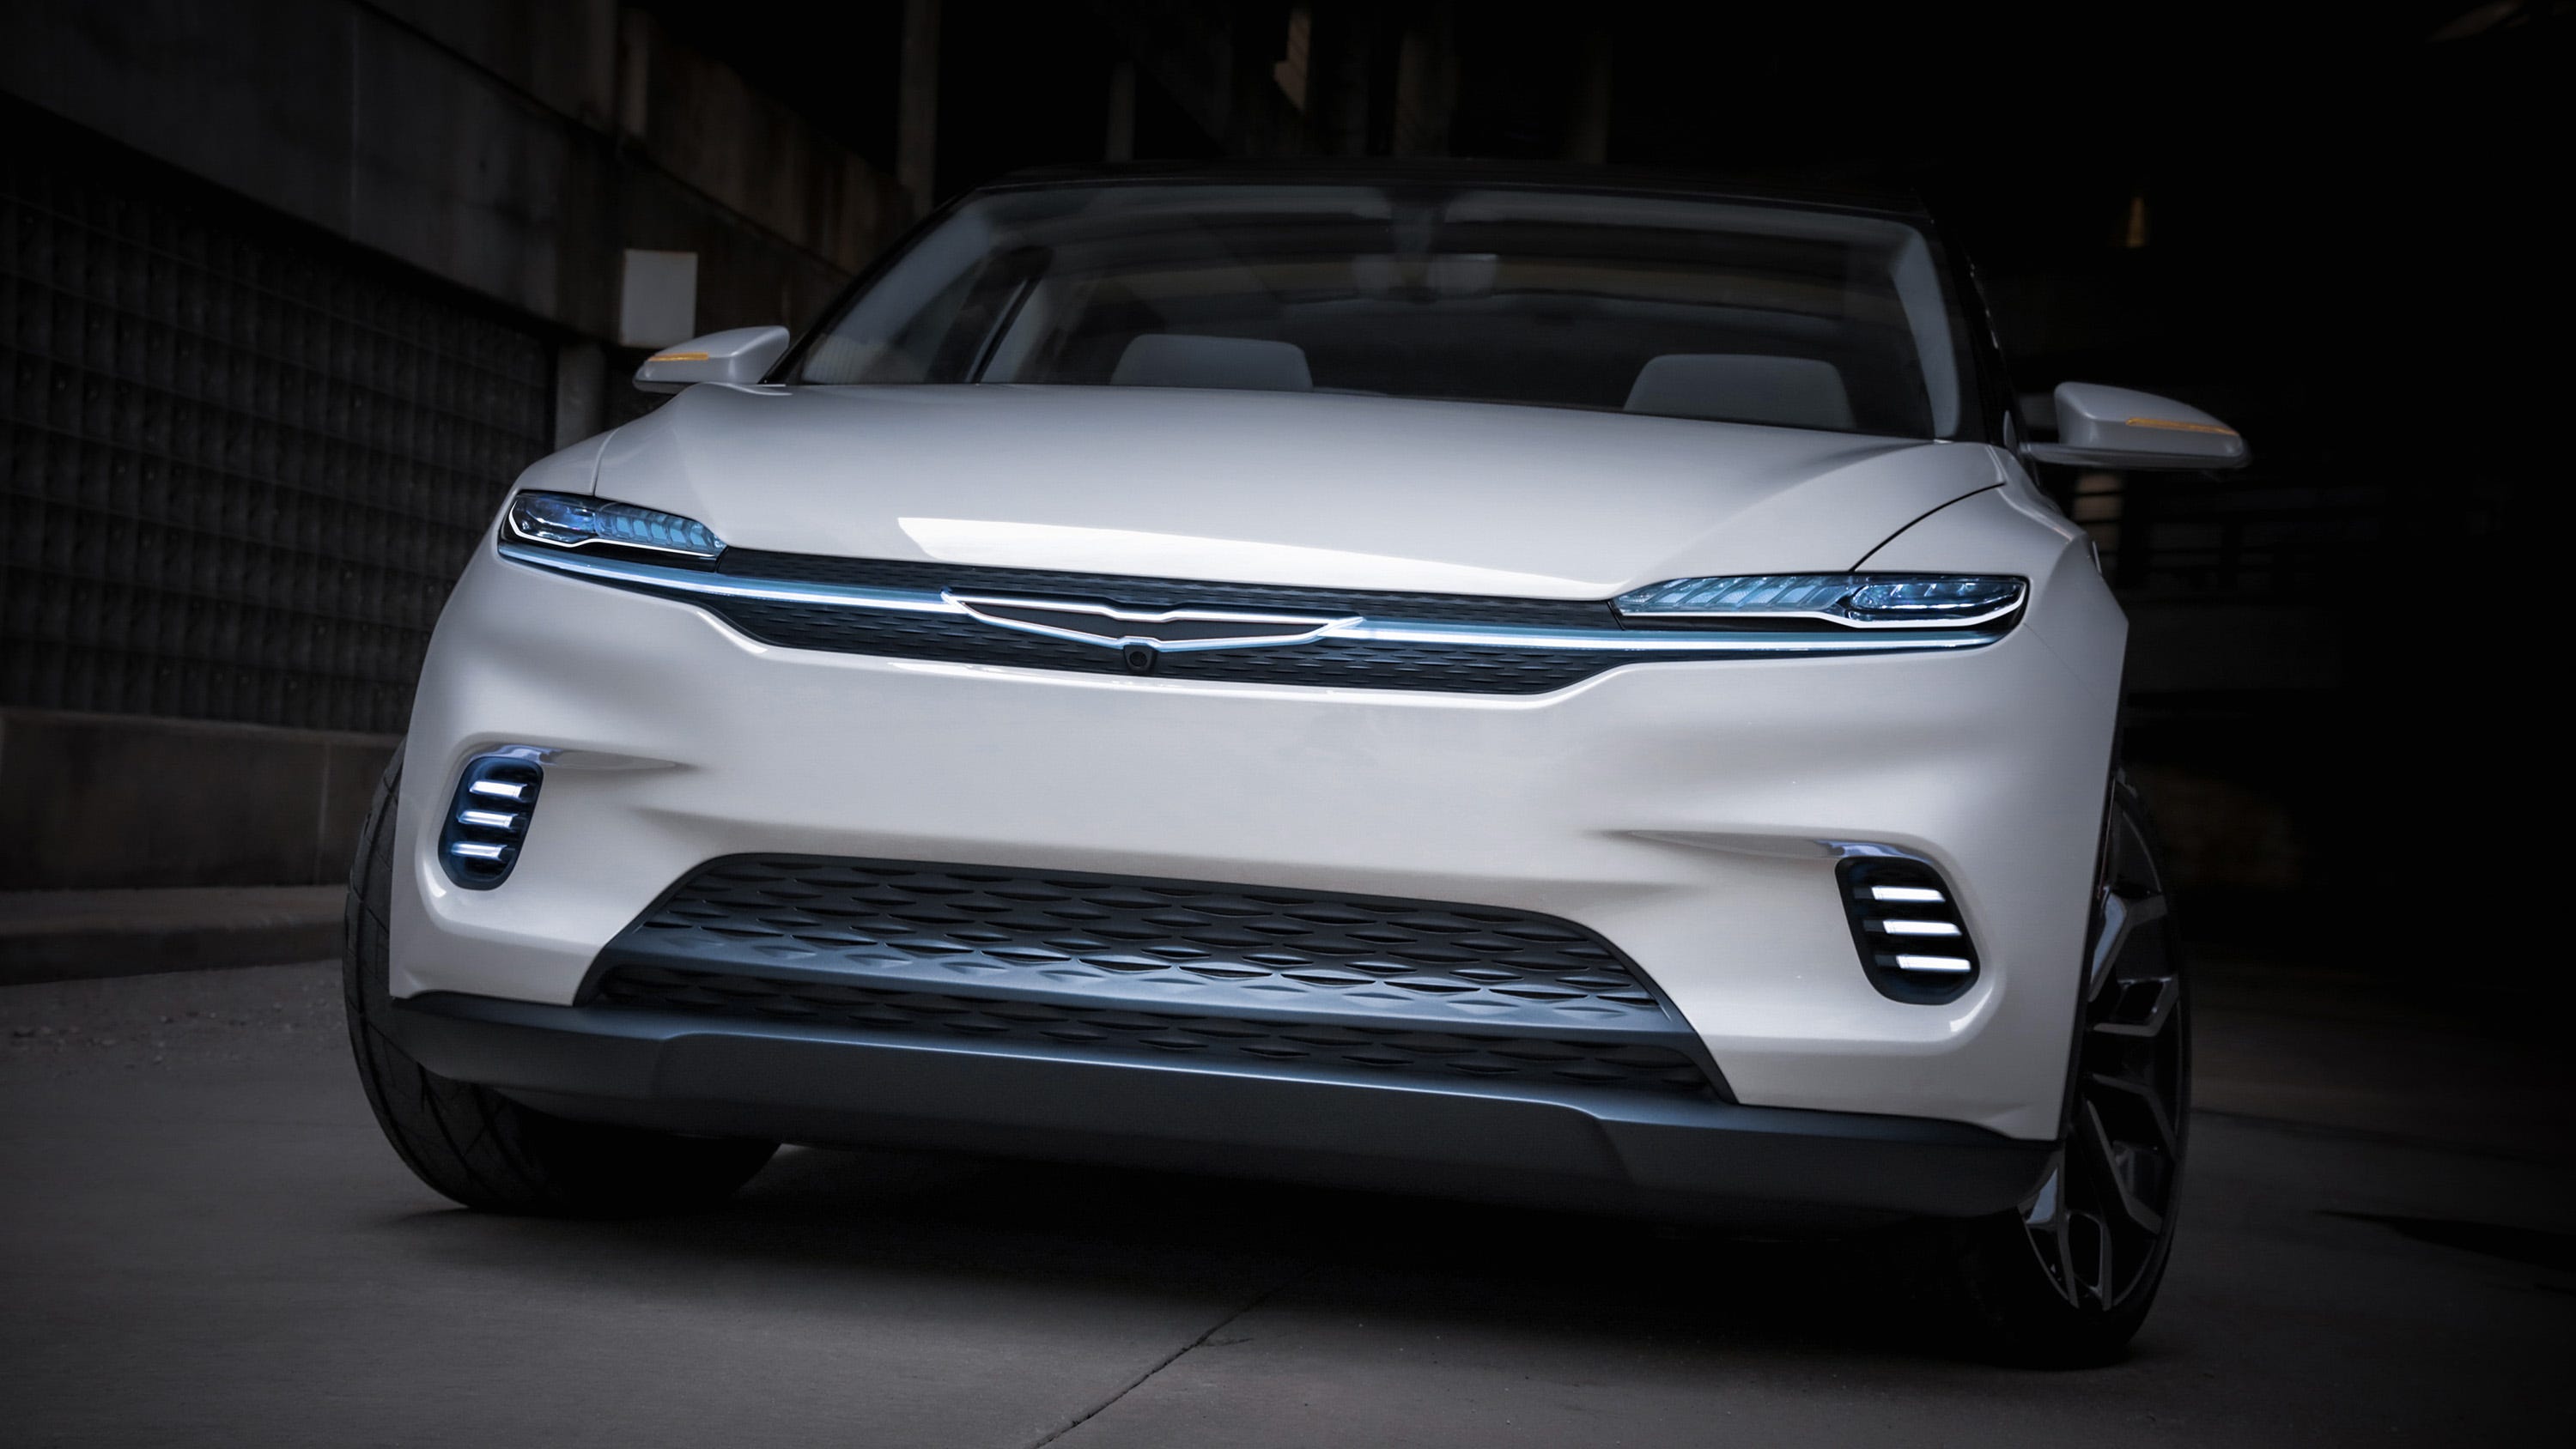 The Chrysler Airflow Concept announces its electric aesthetic with the Chrysler Wing logo tied into a cross-car grille/light blade illuminated with crystal LED lighting.